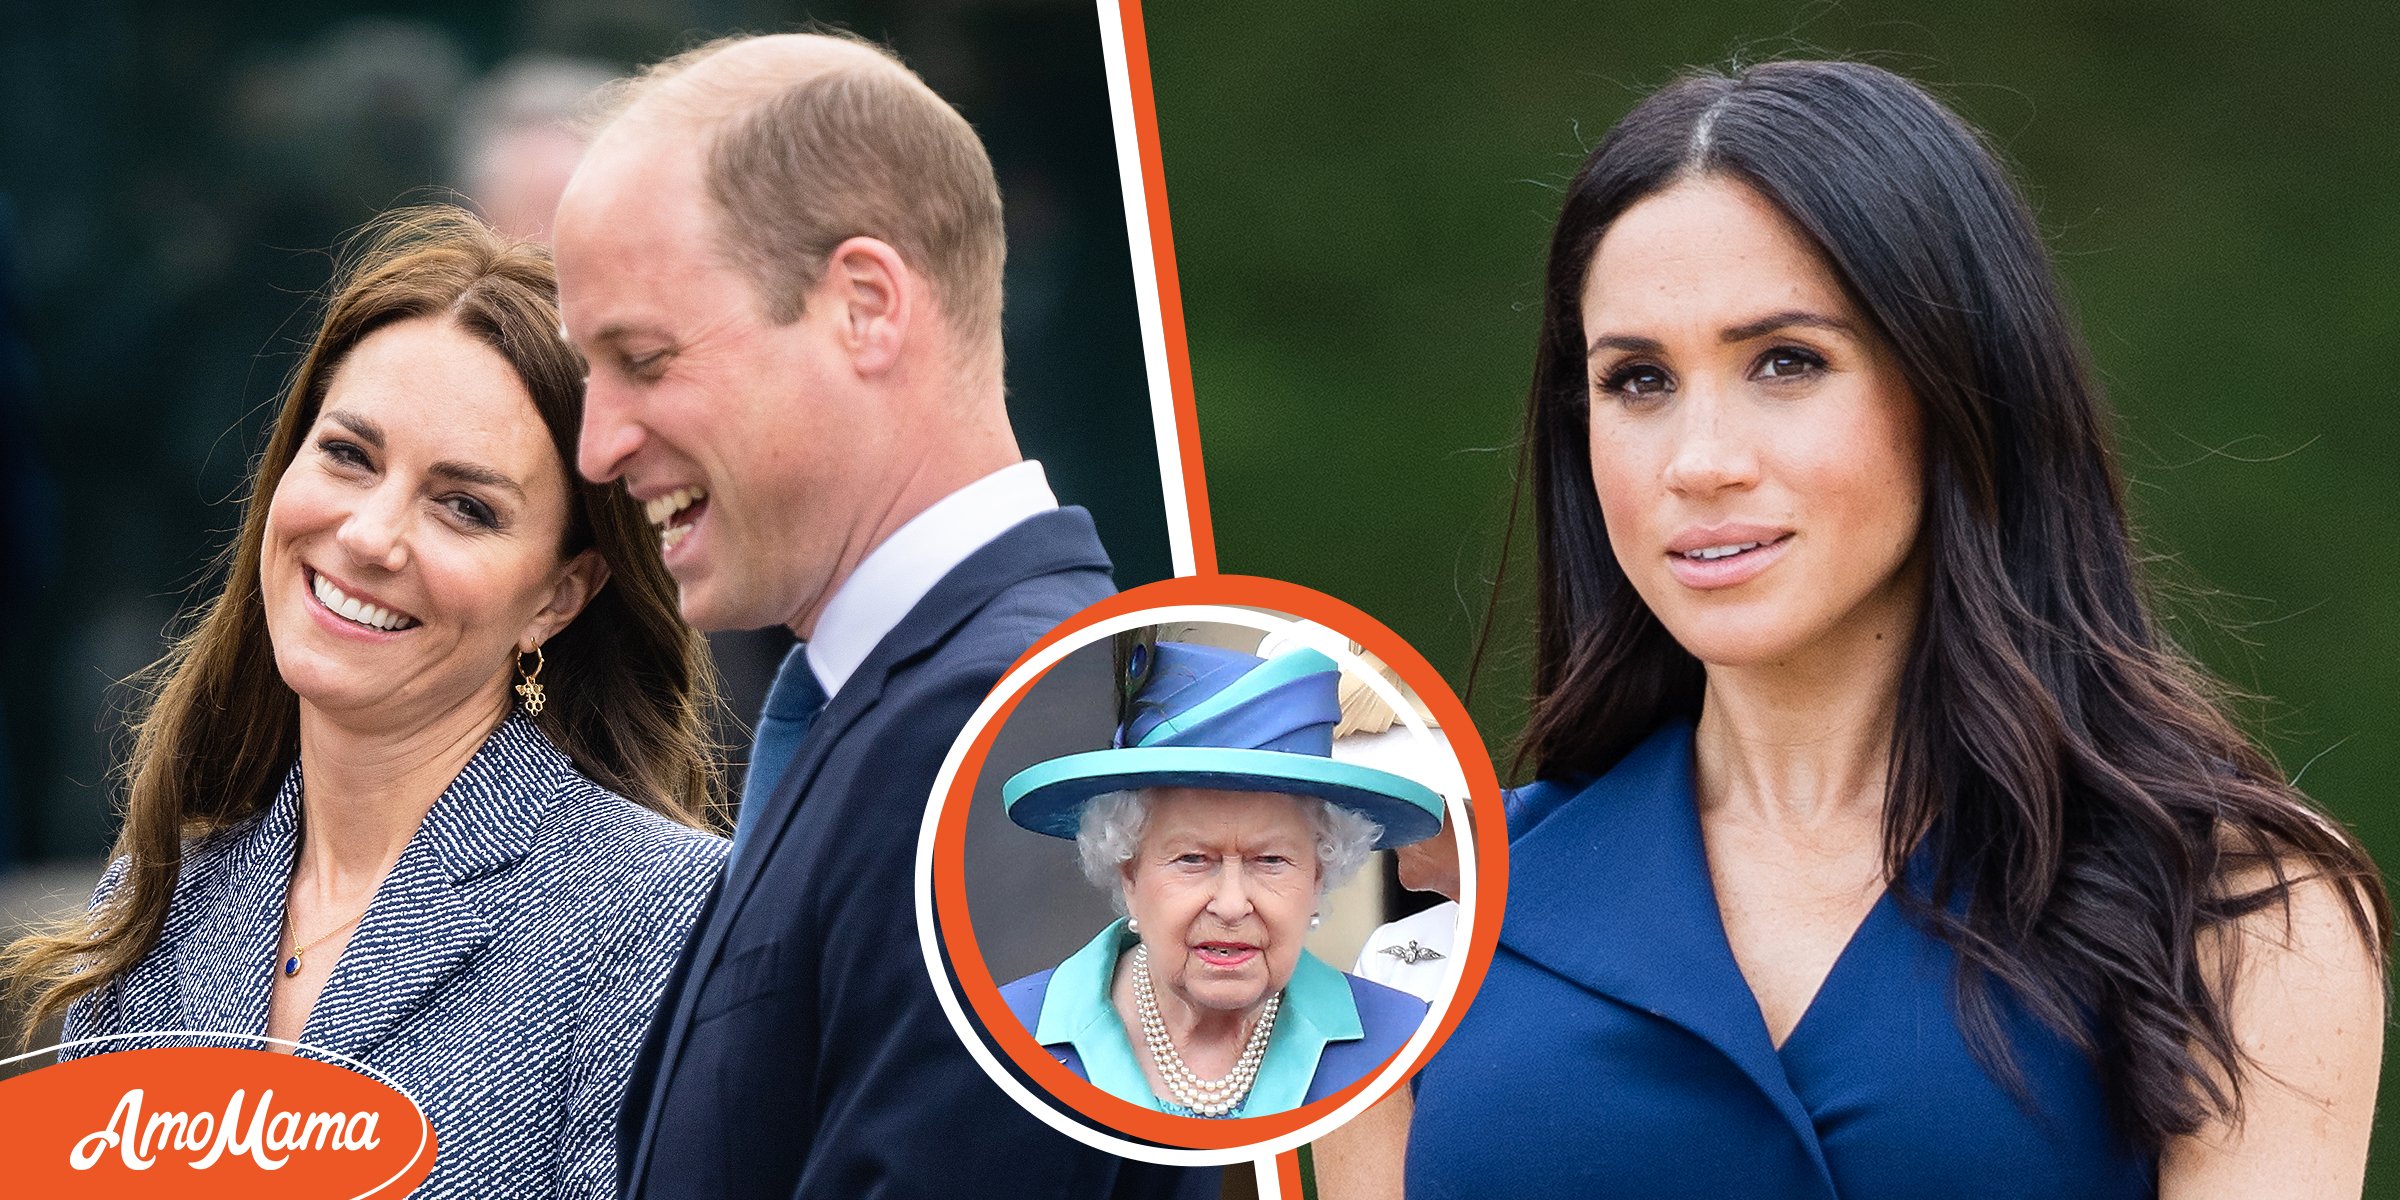 Fans Say Kate & William Disrespected Meghan in Birthday Post — Expert Explains Queen’s ‘Notable’ Missing Tribute